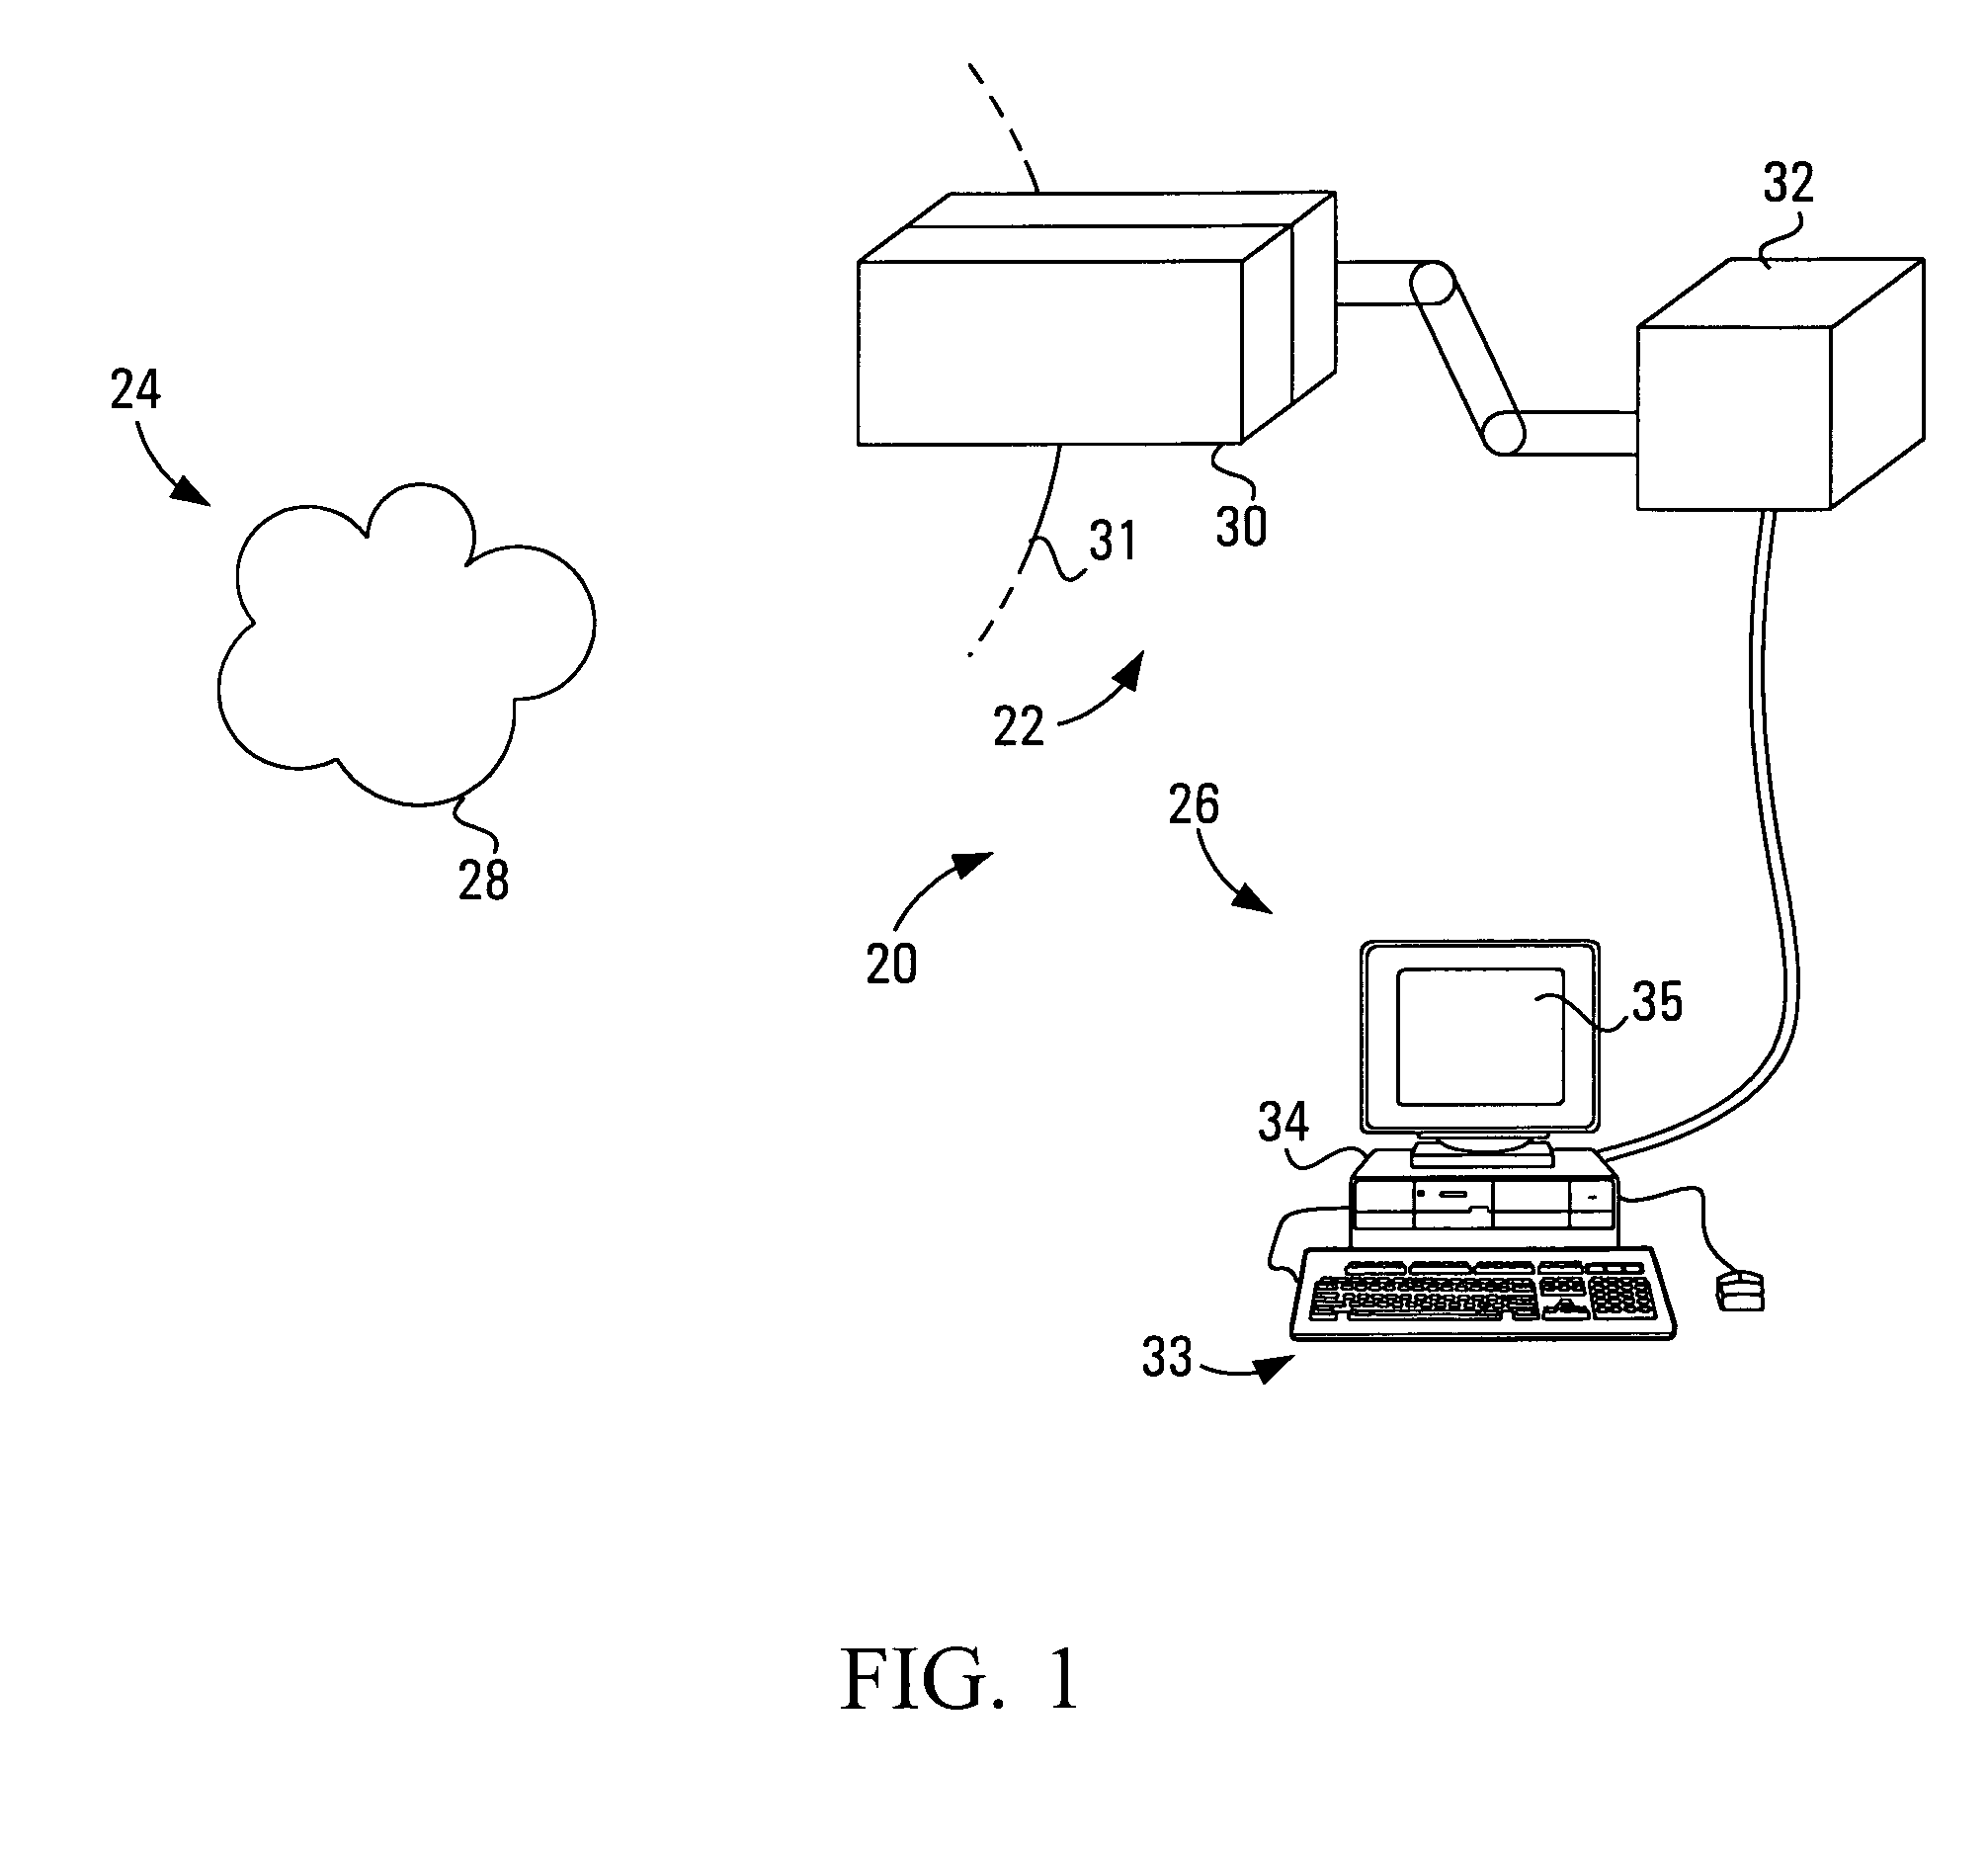 Method and apparatus for producing a representation of a measurable property which varies in time and space, for producing an image representing changes in radioactivity in an object and for analyzing tomography scan images